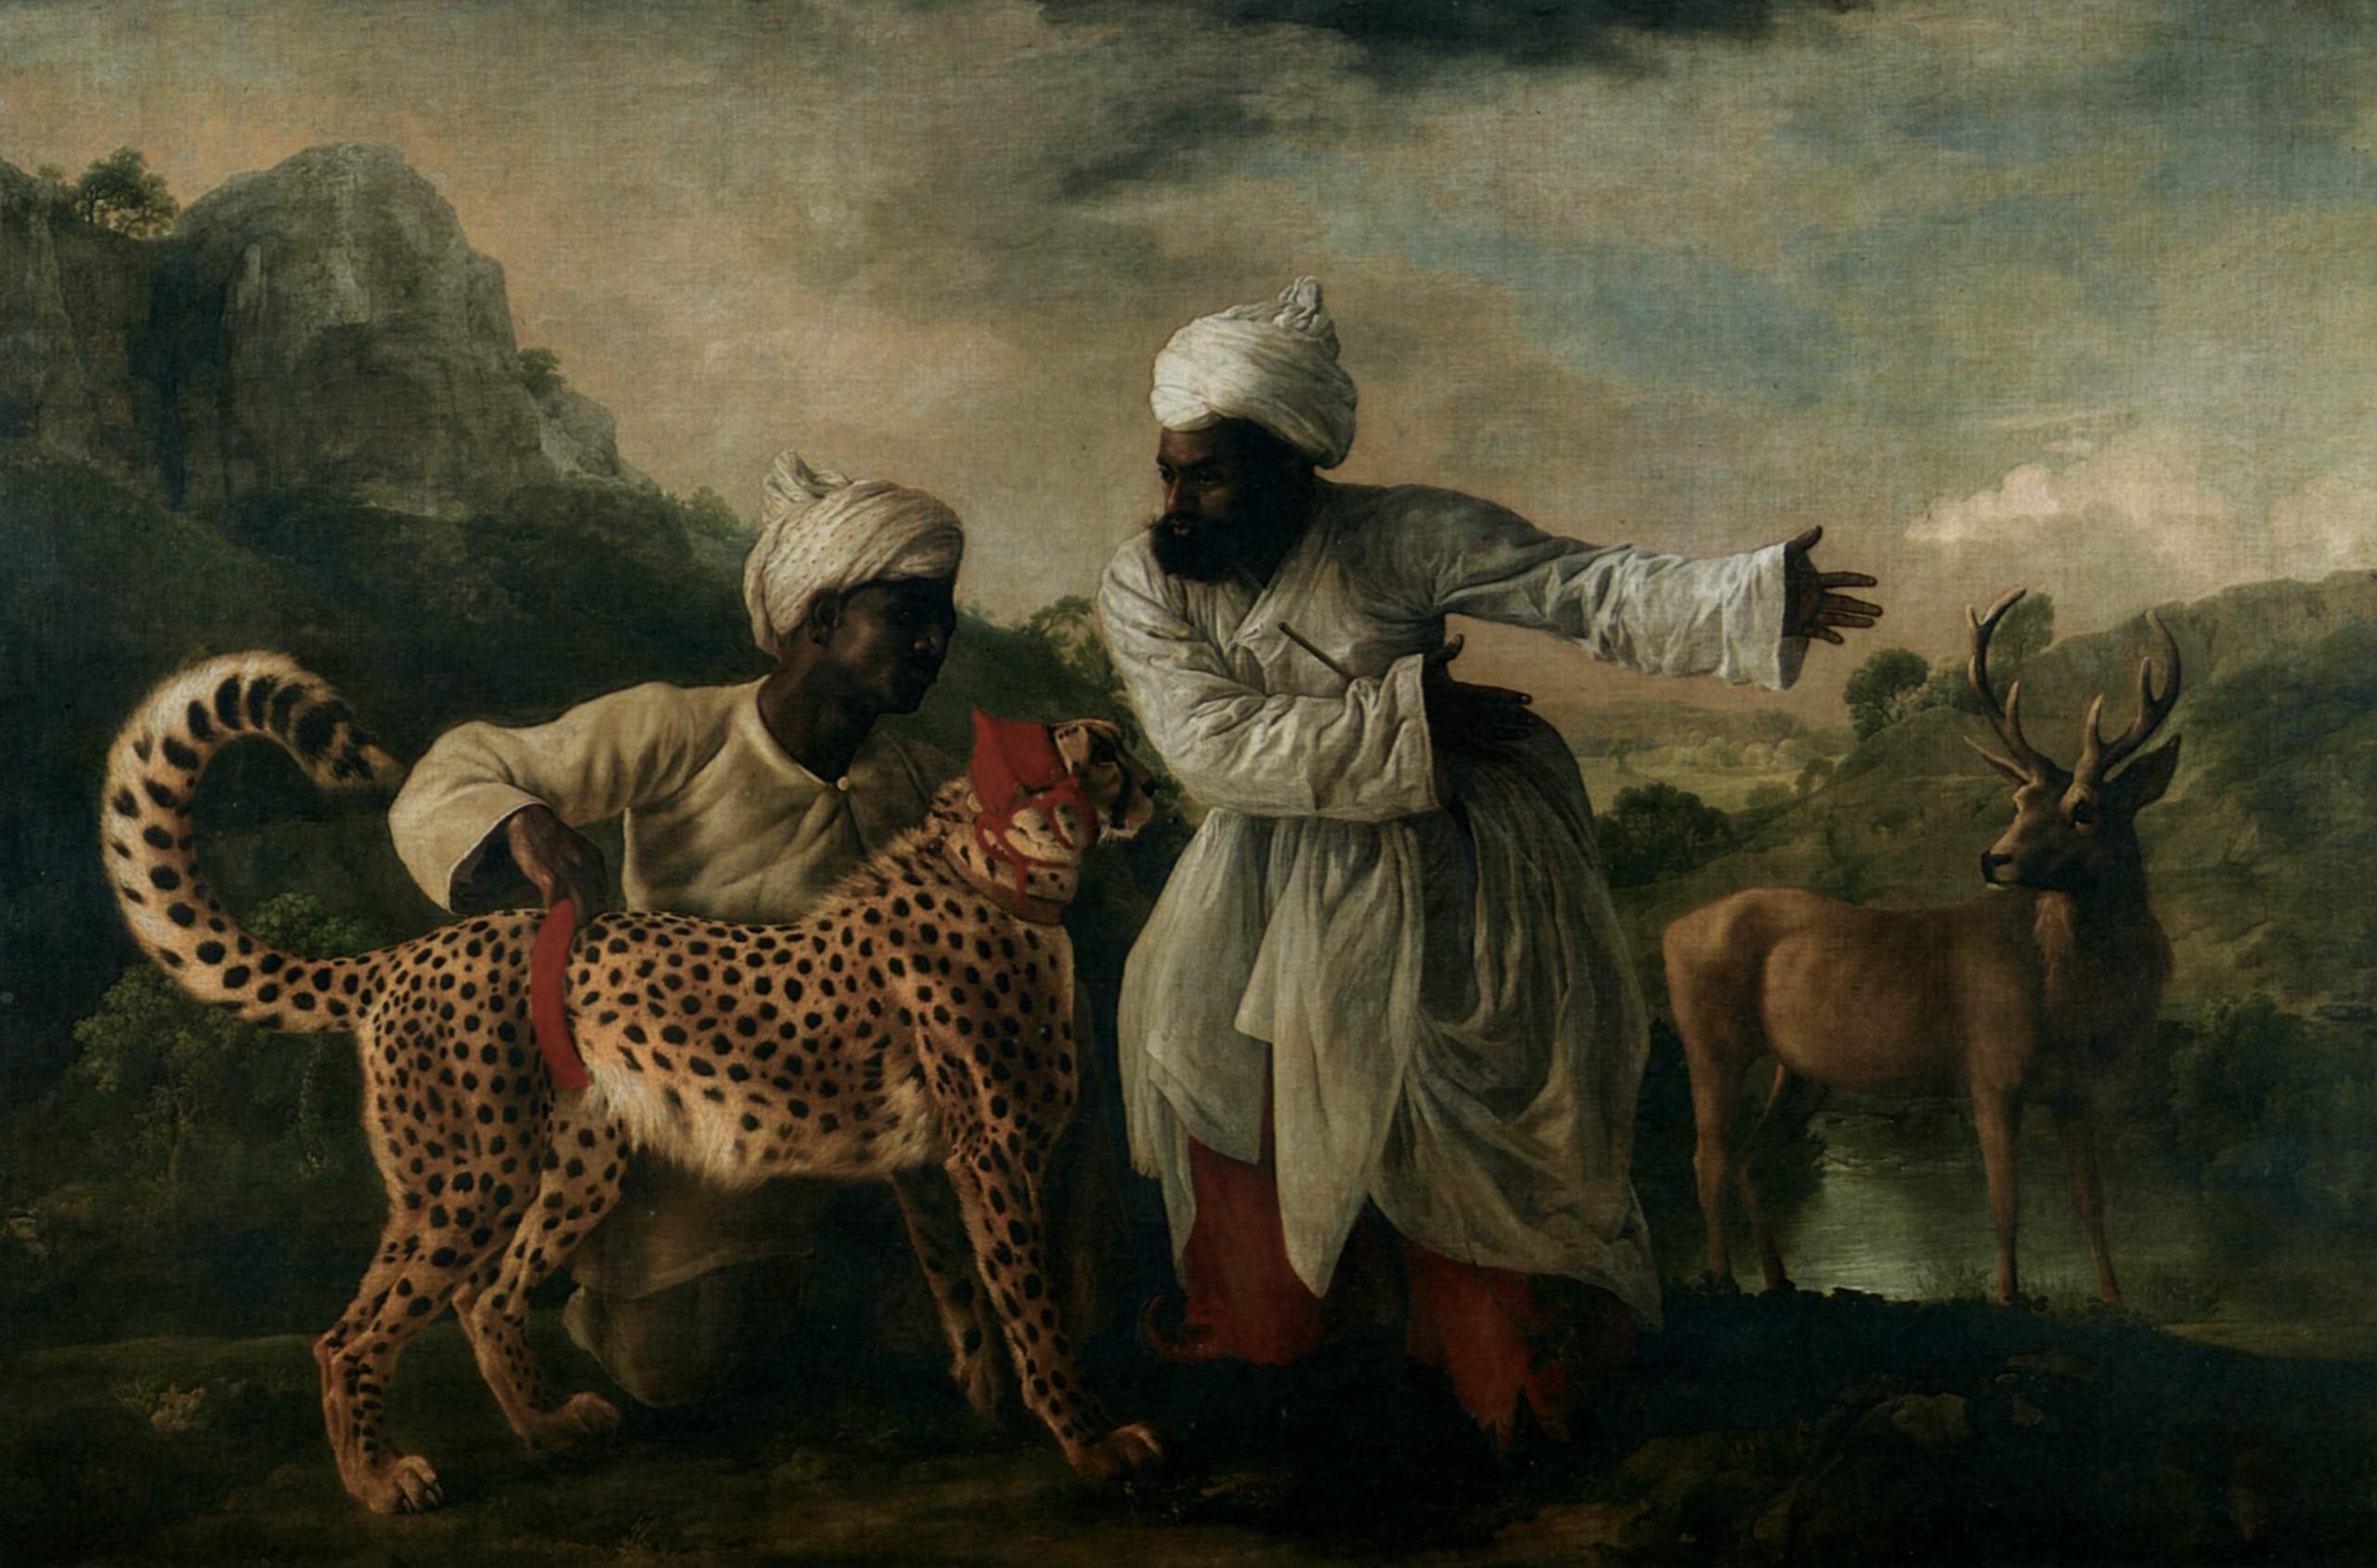 http://uploads0.wikiart.org/images/george-stubbs/cheetah-with-two-indian-servants-and-a-deer.jpg